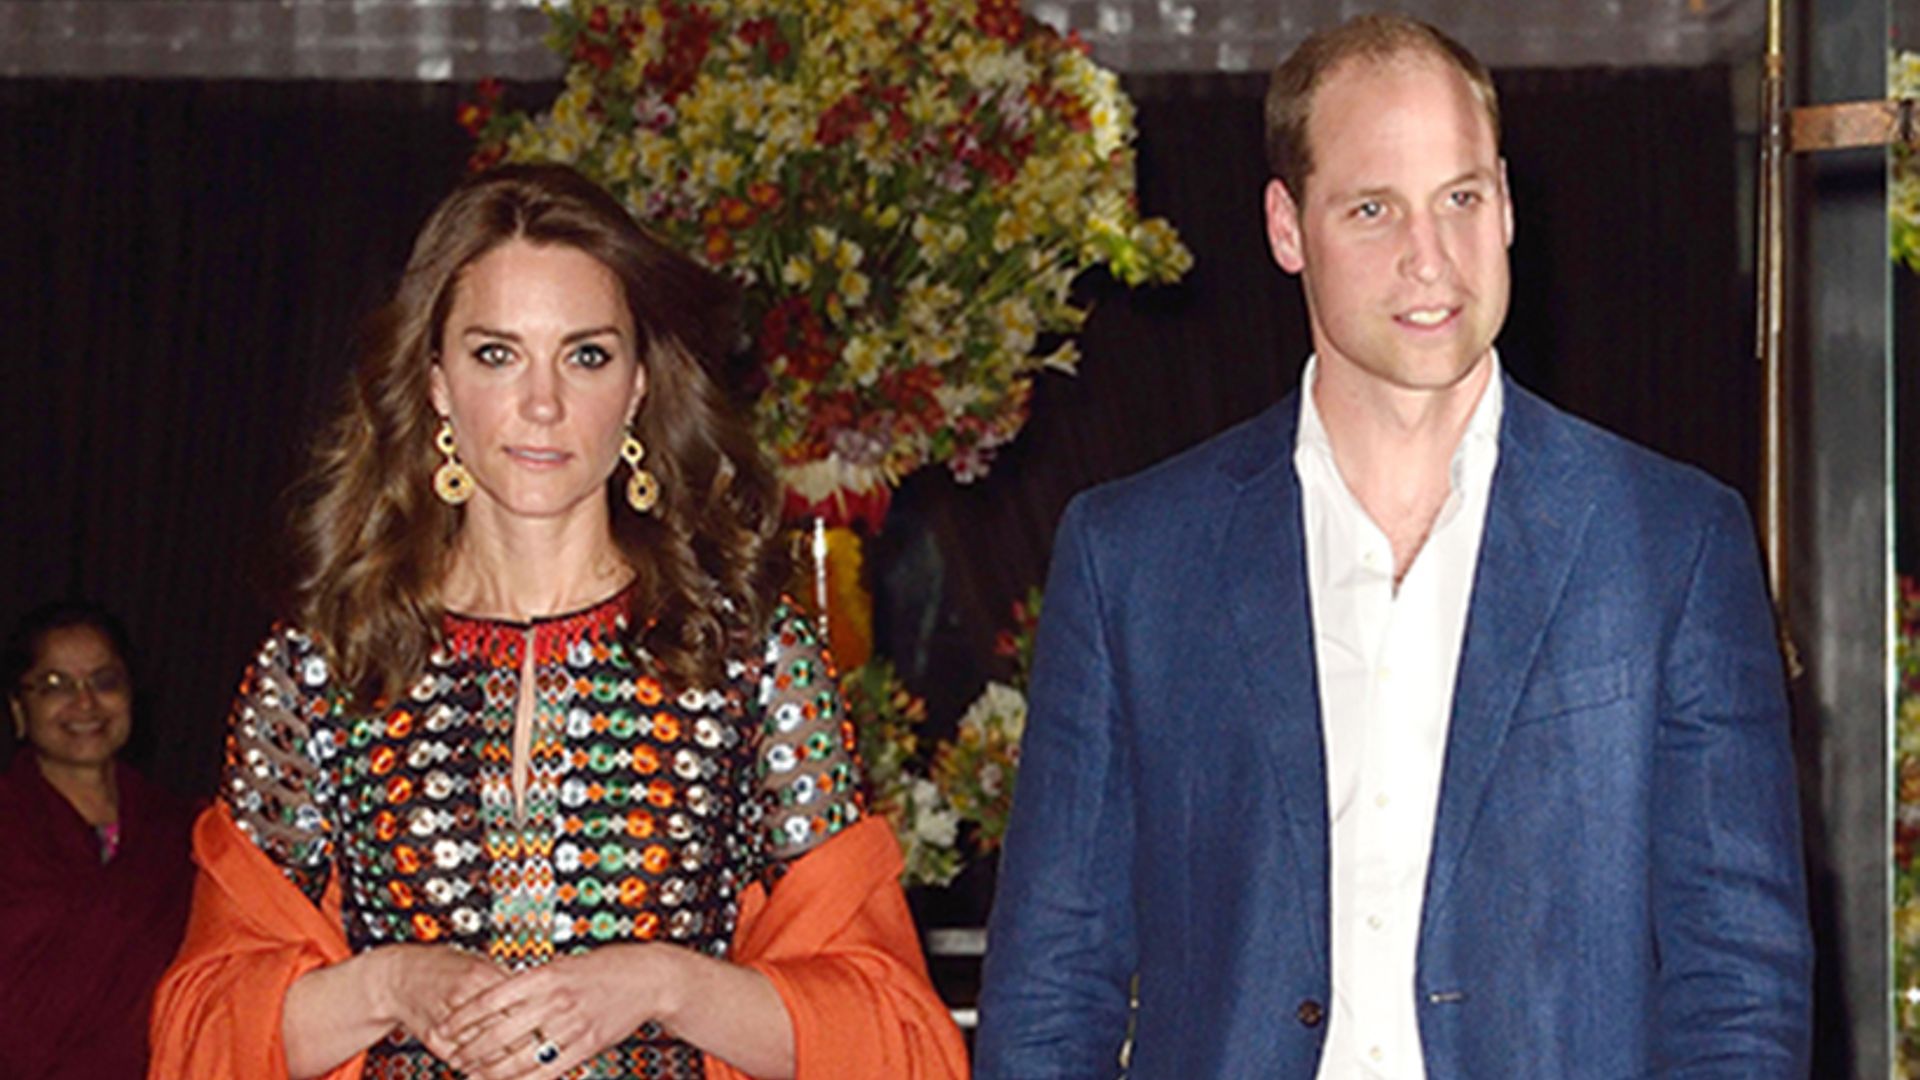 Prince William and Kate enjoy low key dinner date with Pippa Middleton and James Matthews